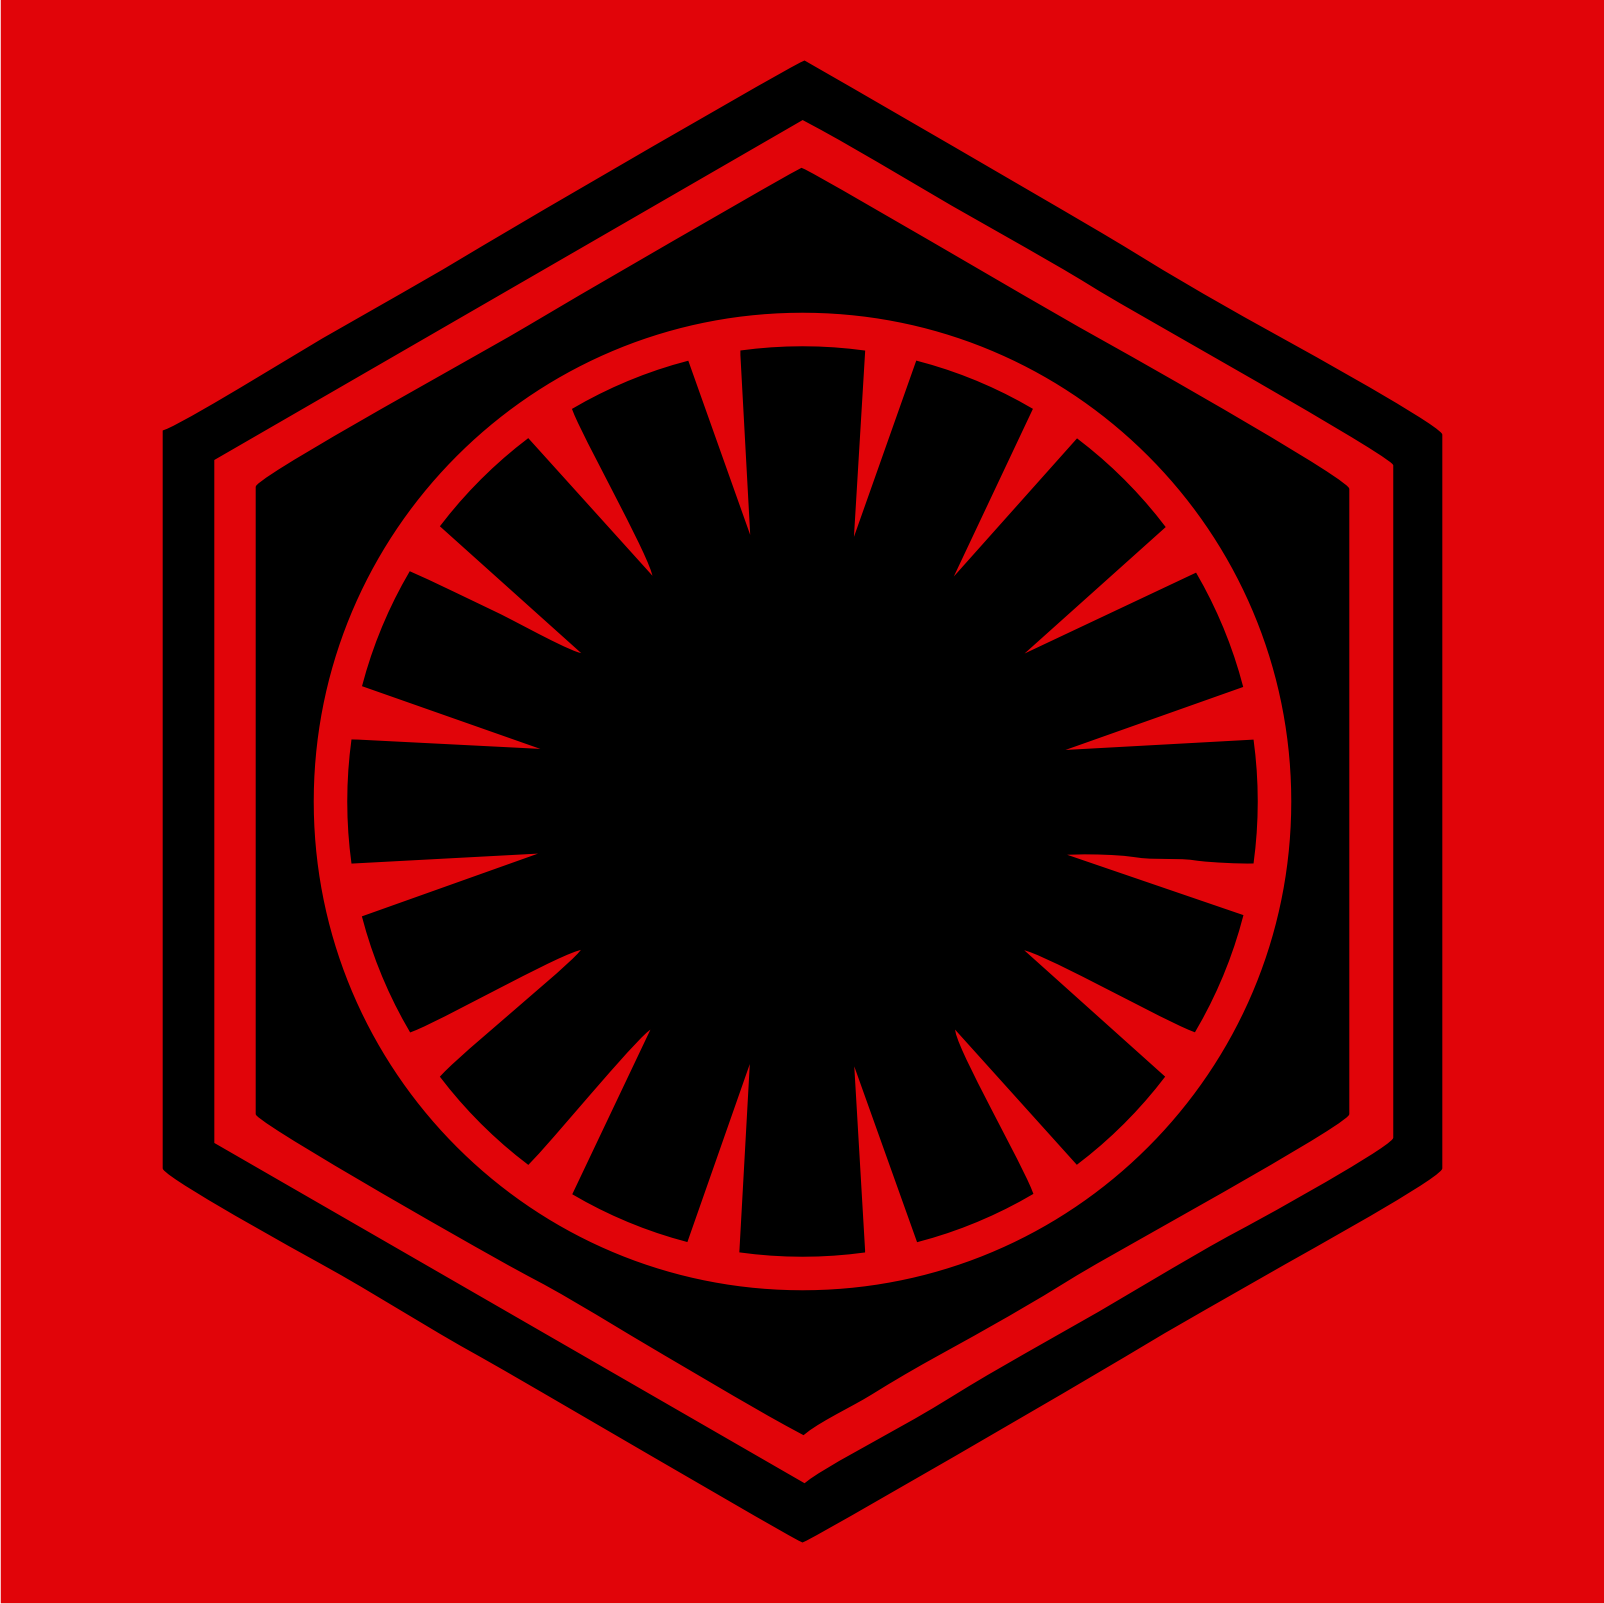 Star Wars The Force Awakens The First Order Logo by OvidiuMUCA on